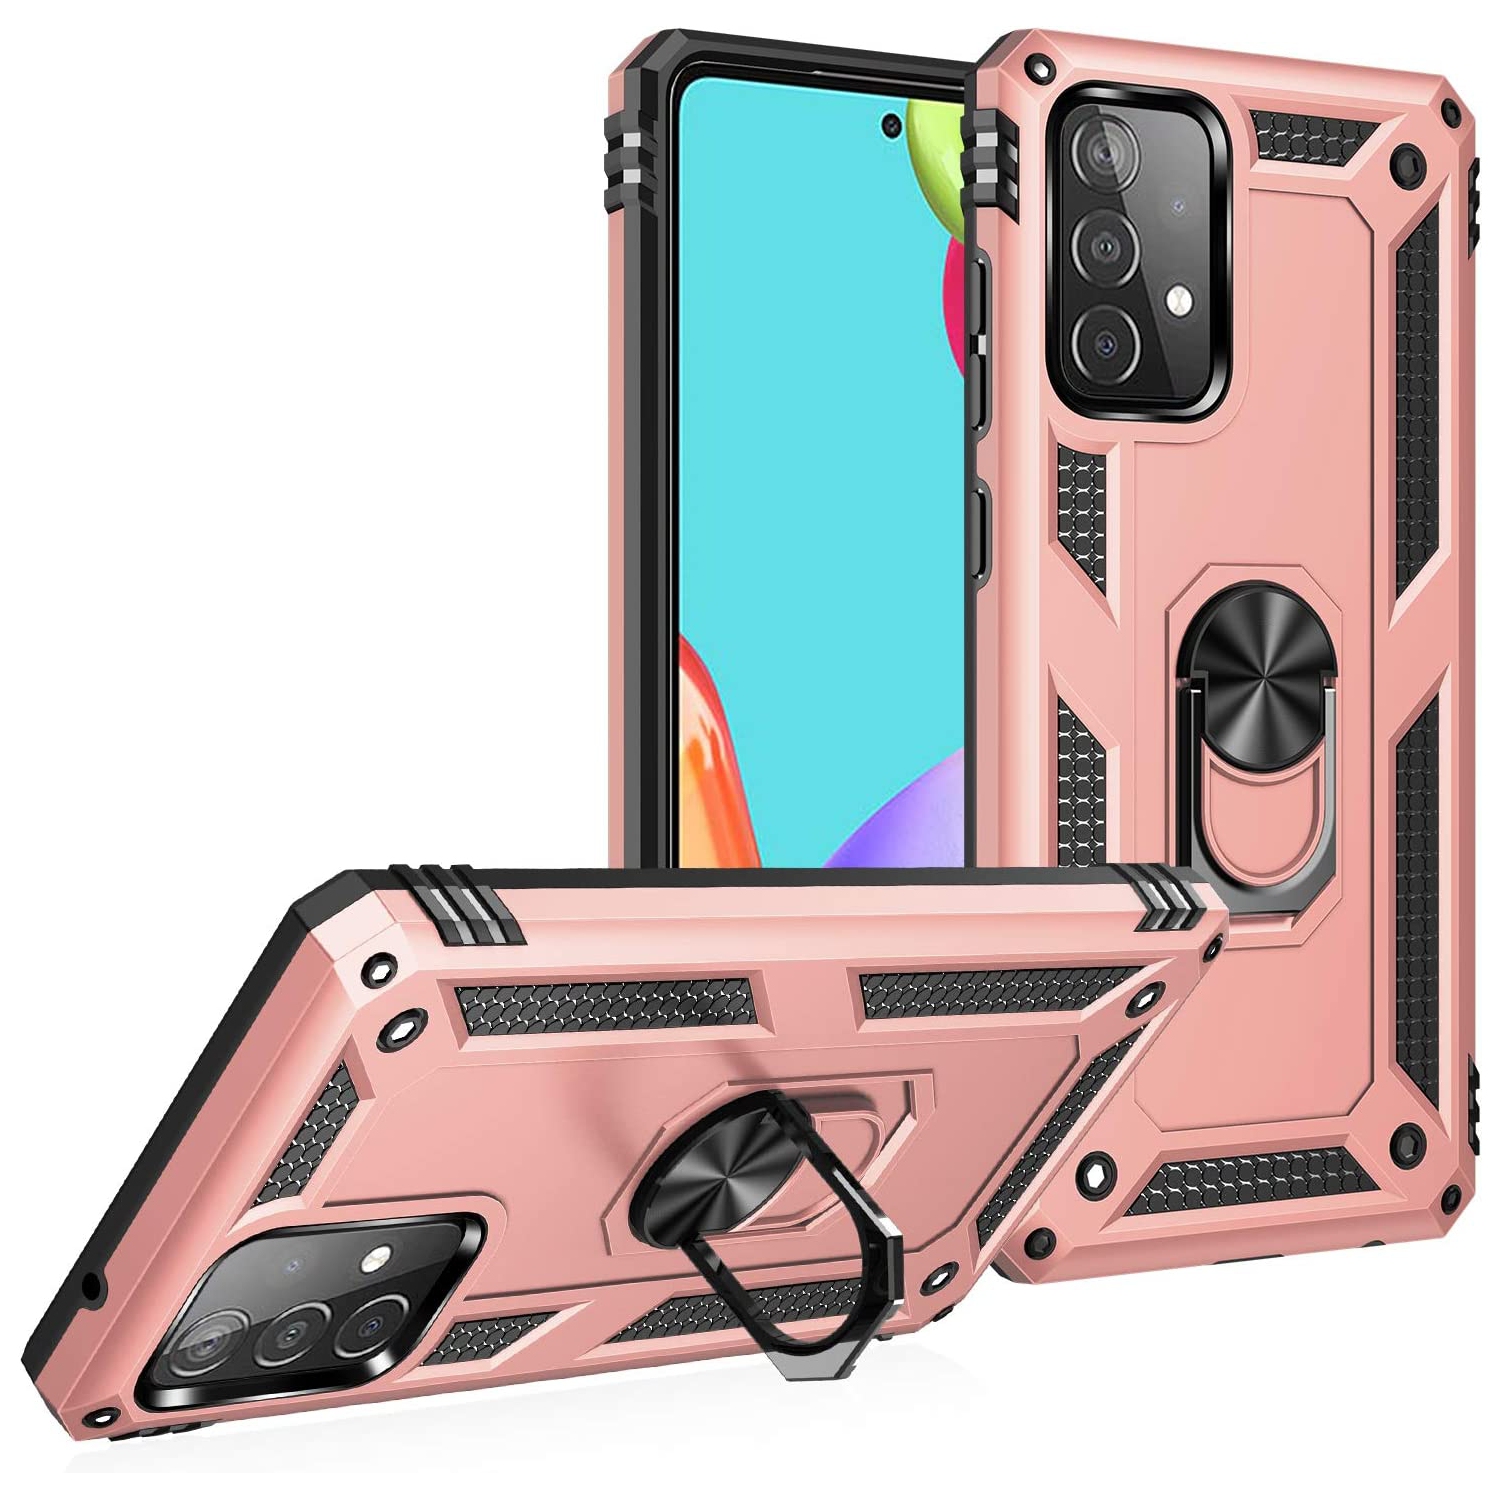 SuperShield Samsung Galaxy A52 Case for Samsung A52 Basic Cases Rugged Military Grade Heavy Duty Armor Shockproof Anti-Drop A52 4G/5G Phone Case